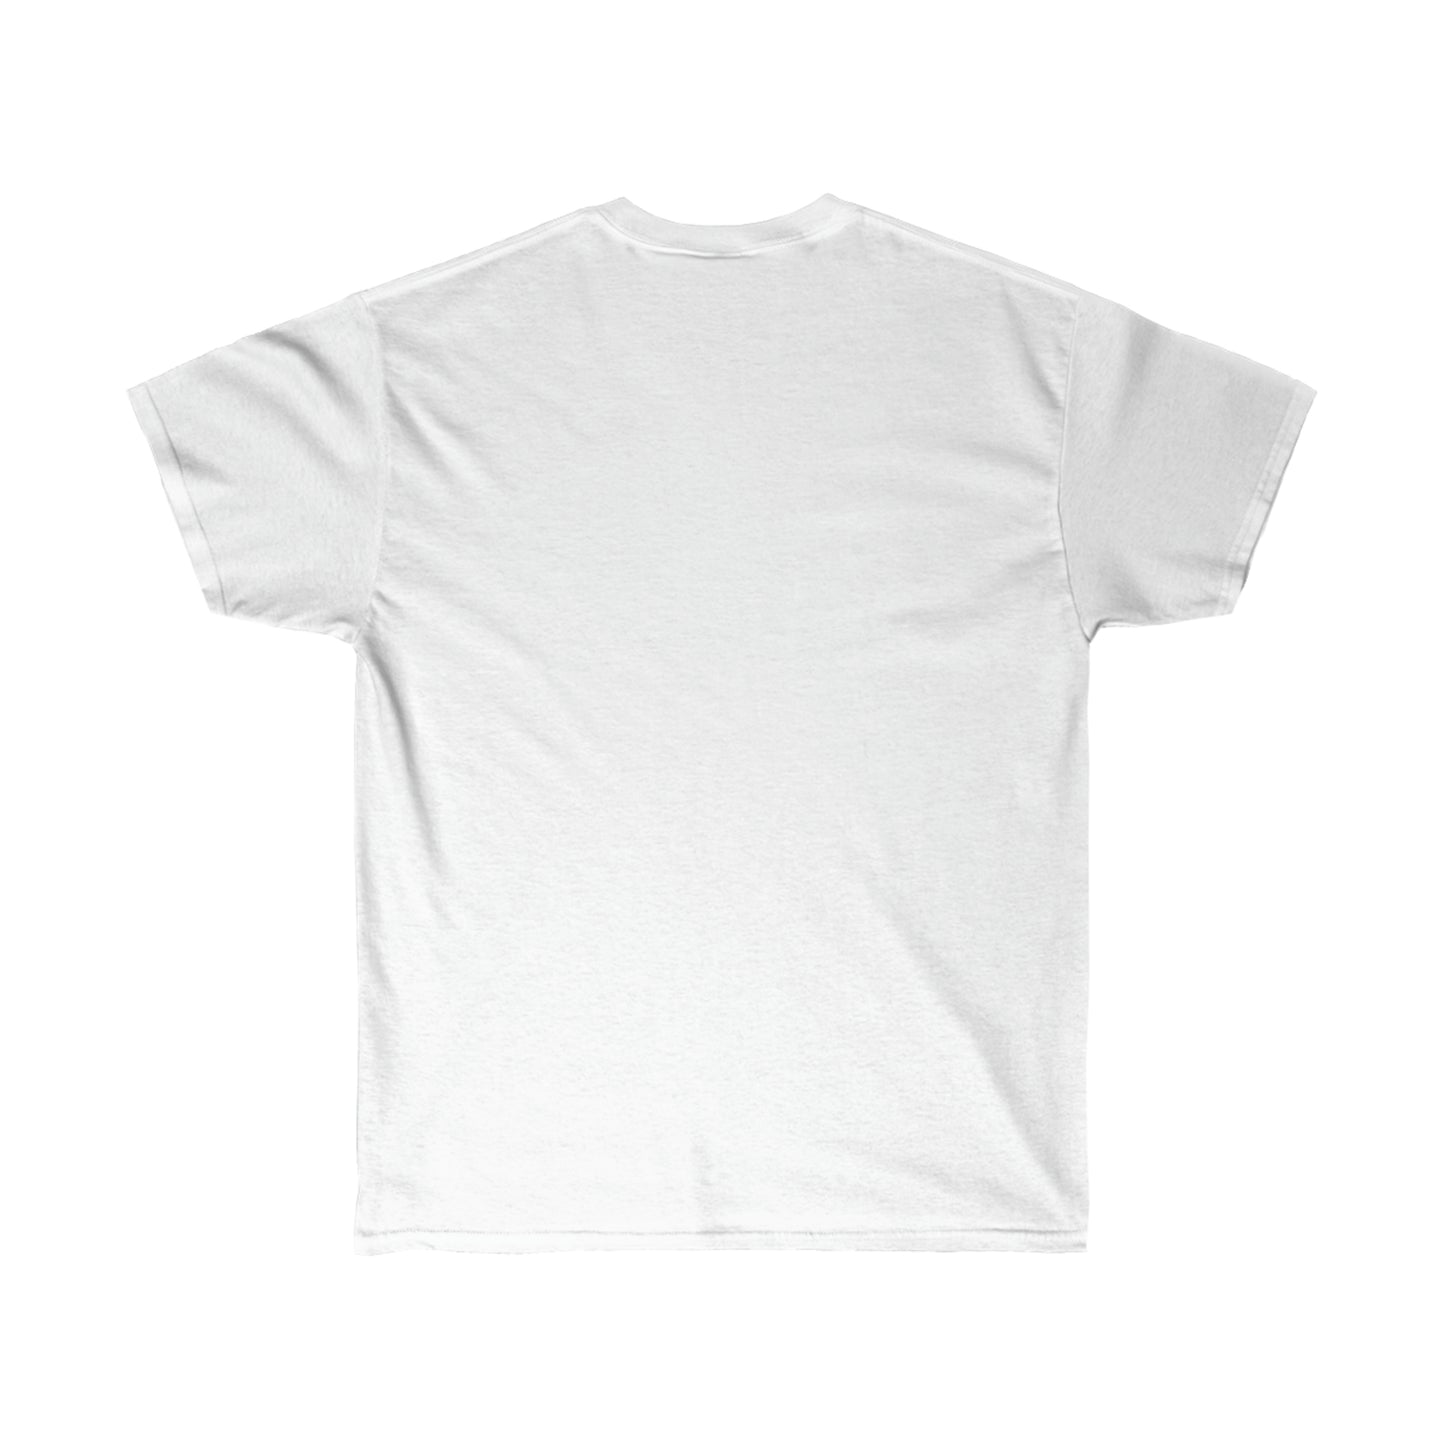 Came up short Unisex Ultra Cotton Tee